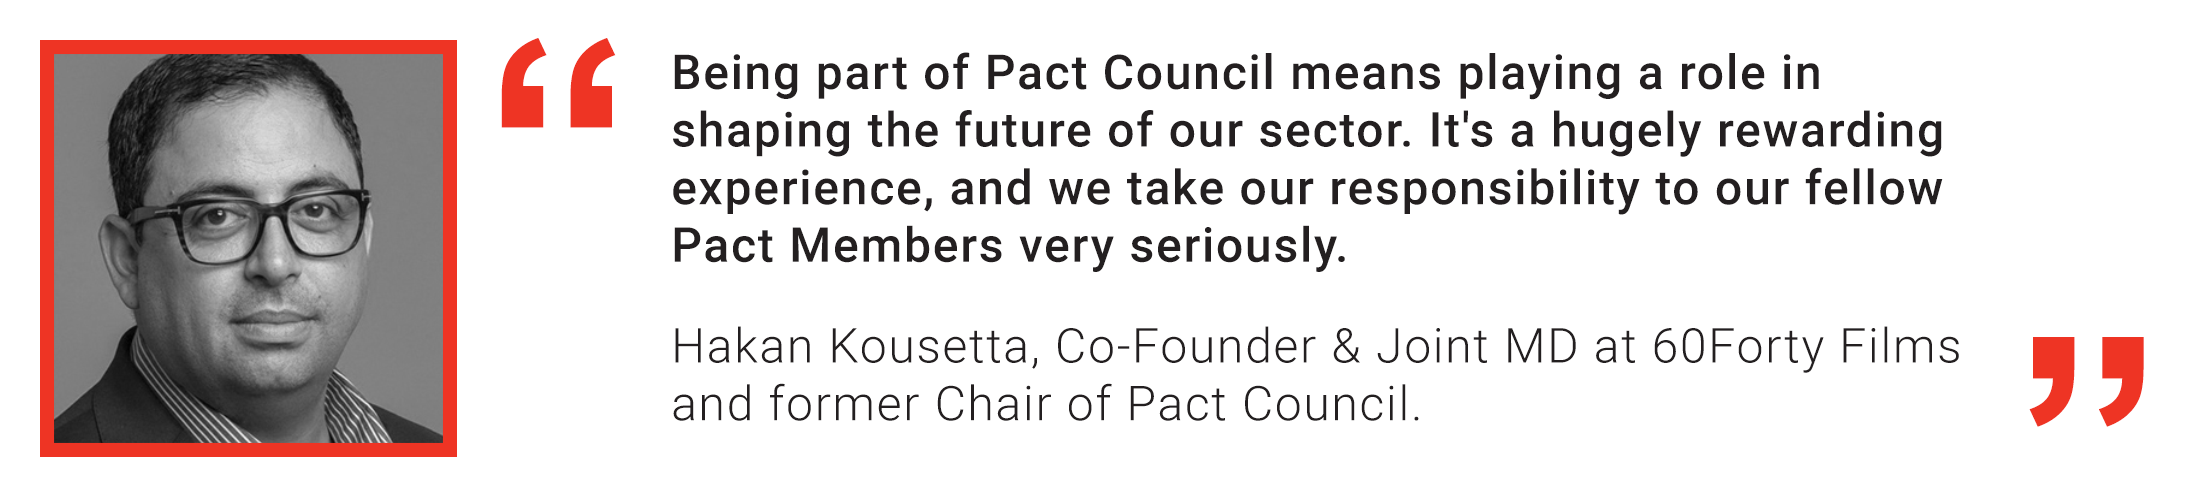 Quote from Hakan Kousetta, Chair of Pact Council: Being part of Pact Council means playing a role in shaping the future of our sector. It's a hugely rewarding experience.